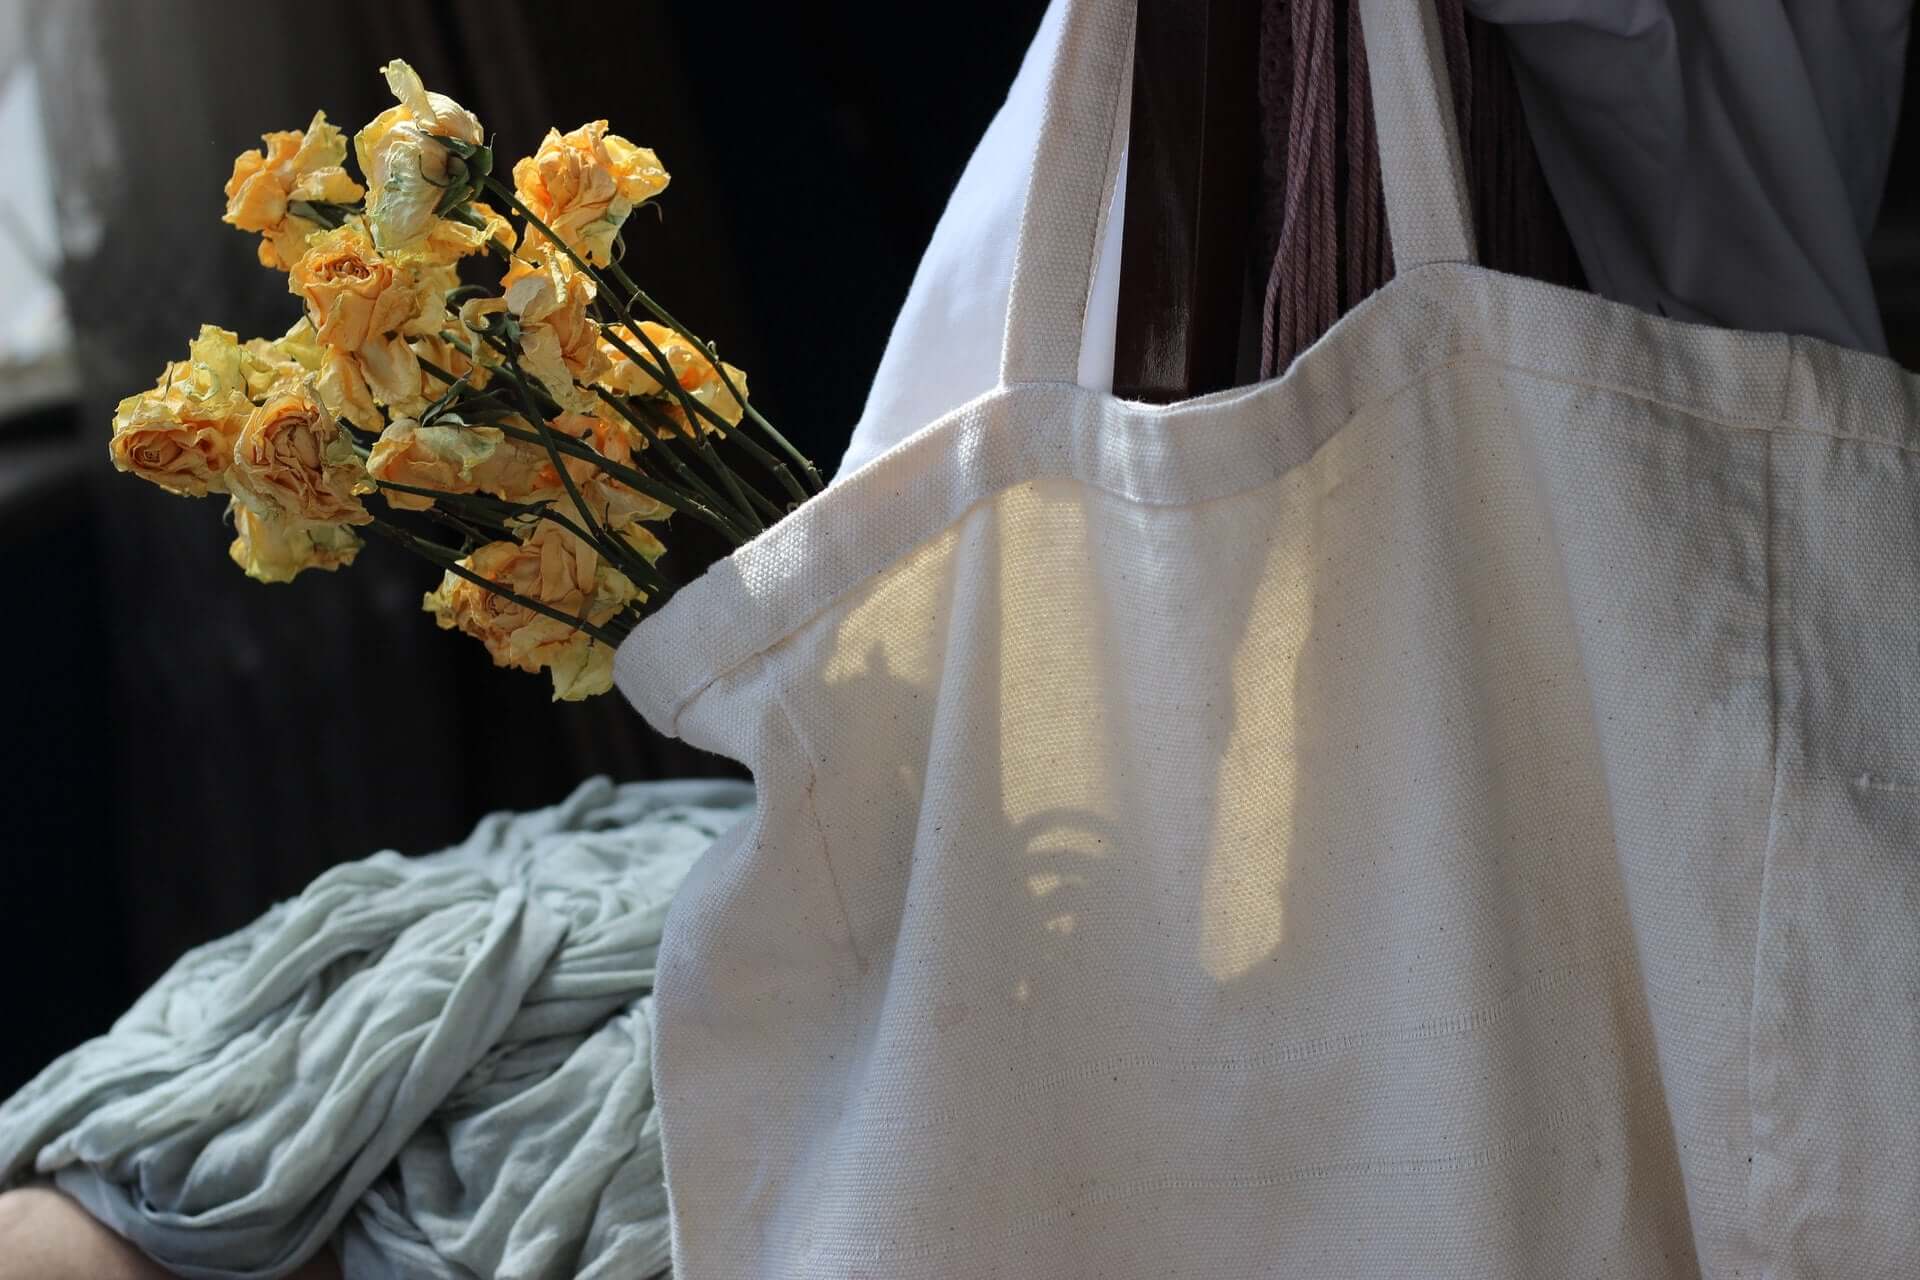 A white canvas tote bag holding yellow flowers.